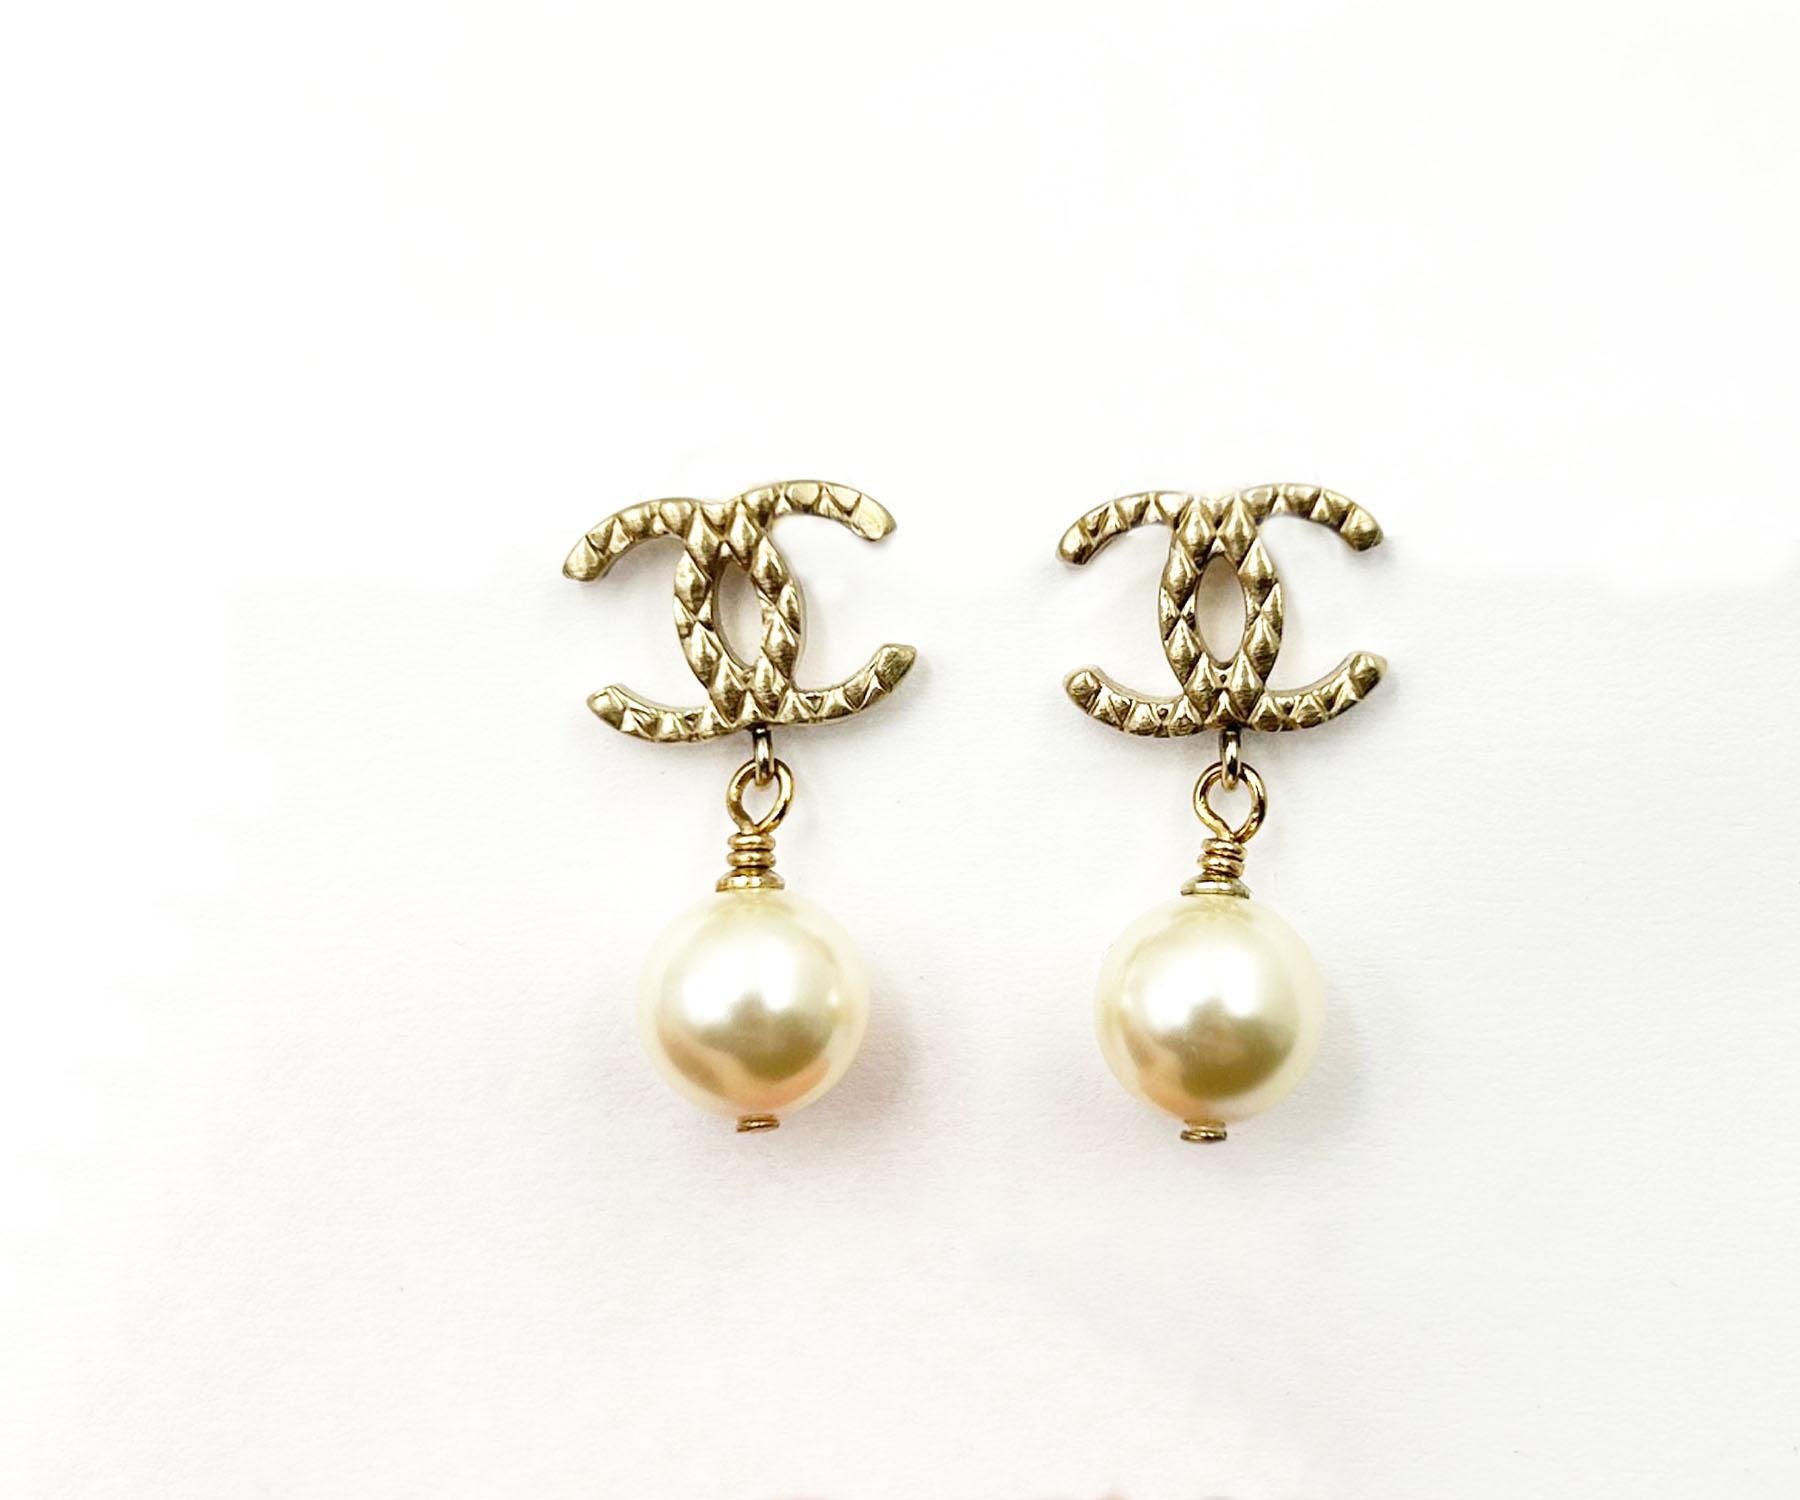 Chanel Classic Gold Plaid CC Pearl Dangle Piercing Earrings

*Marked 11
*Made in Italy

- It is approximately 1.1